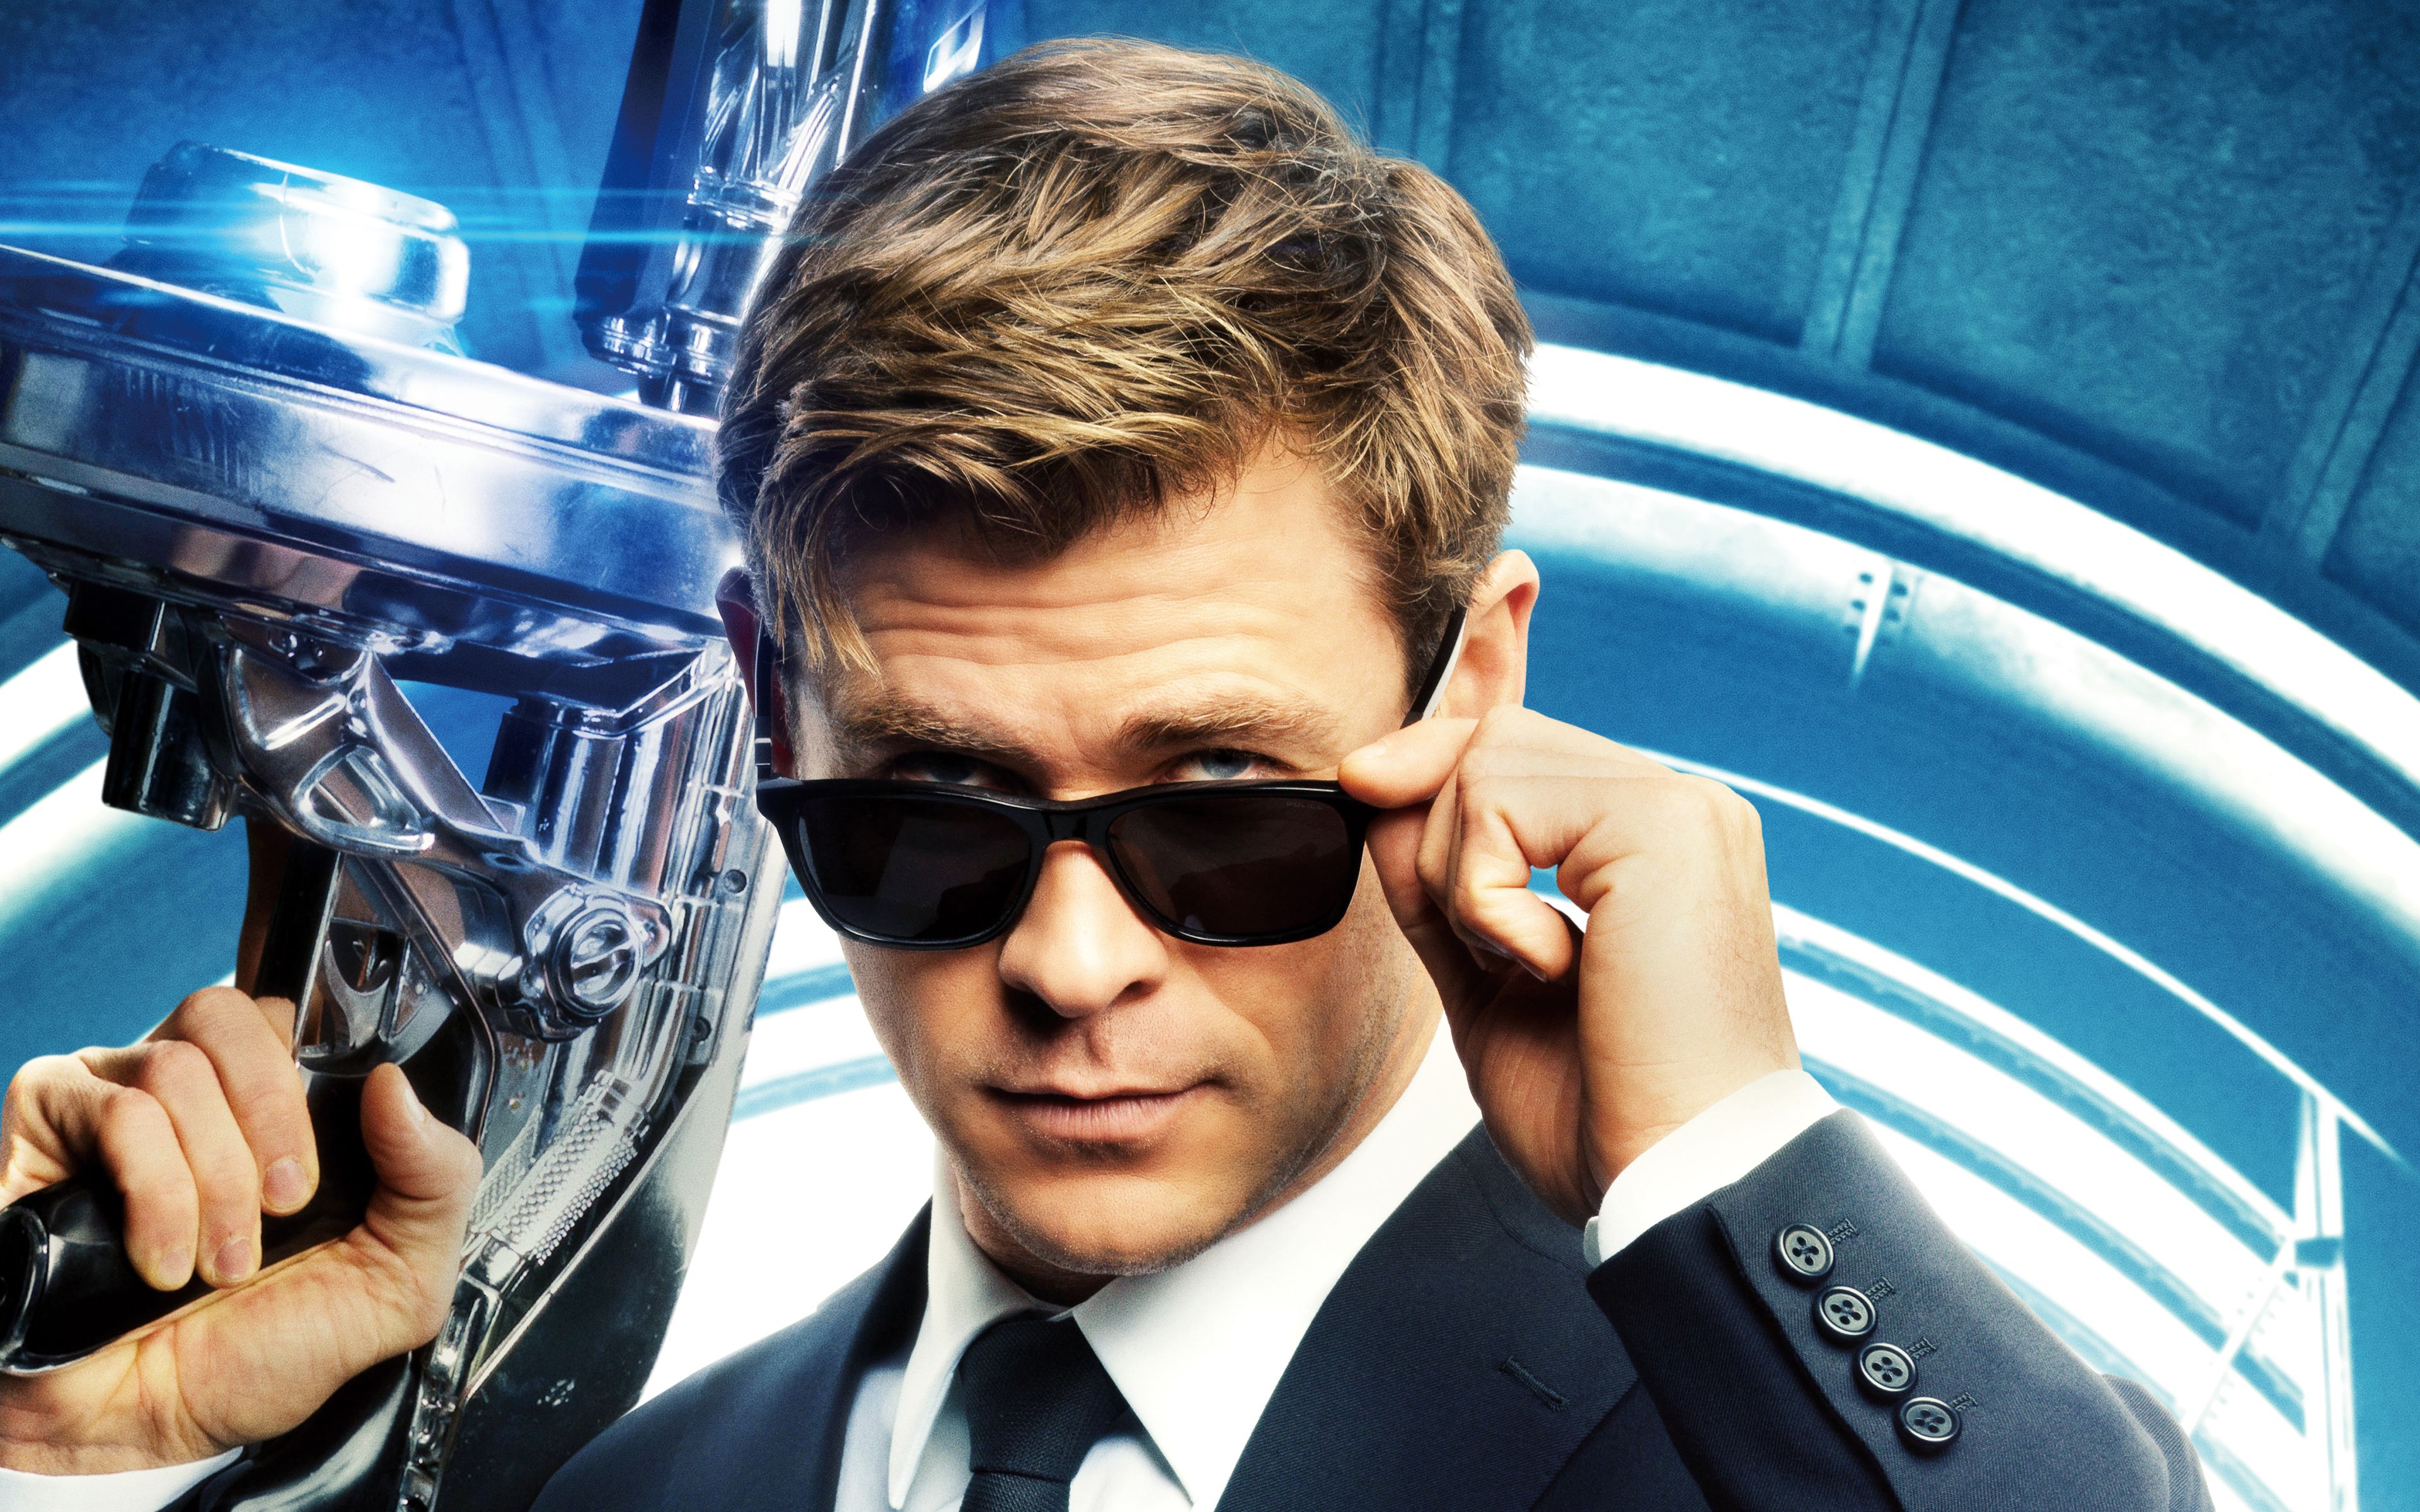 Download wallpaper Agent H, 4k, Men In Black International, 2019 movie, poster, Science fiction, Chris Hemsworth for desktop with resolution 3840x2400. High Quality HD picture wallpaper